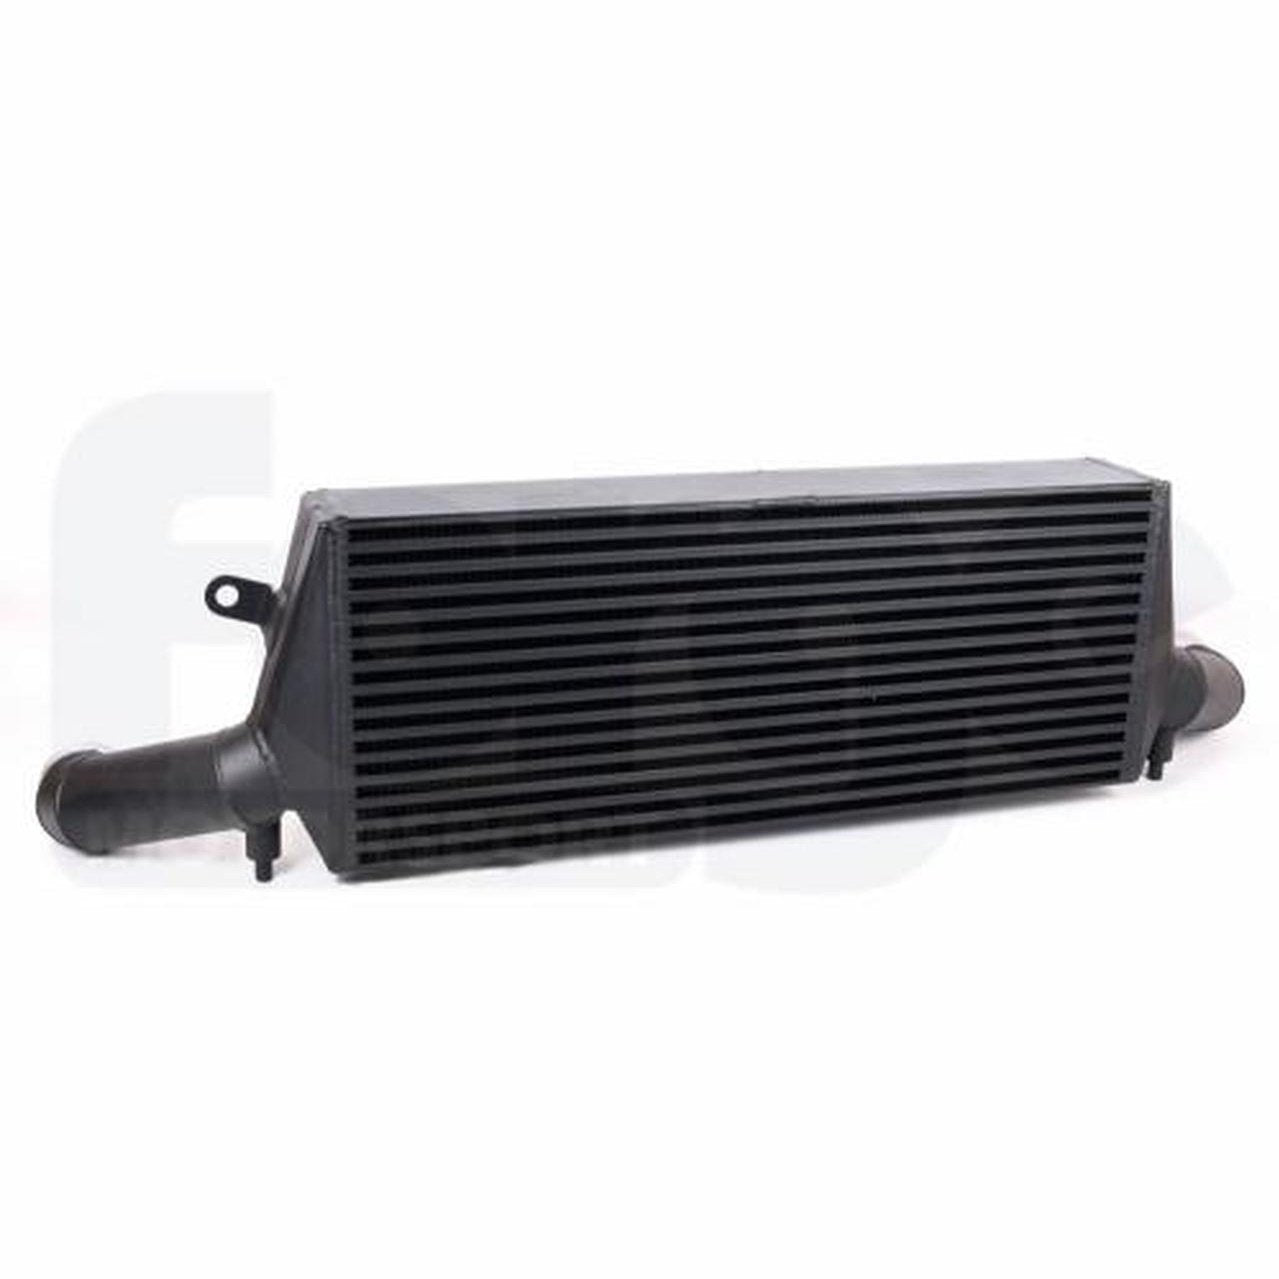 Forge Intercooler for the RS3 8V